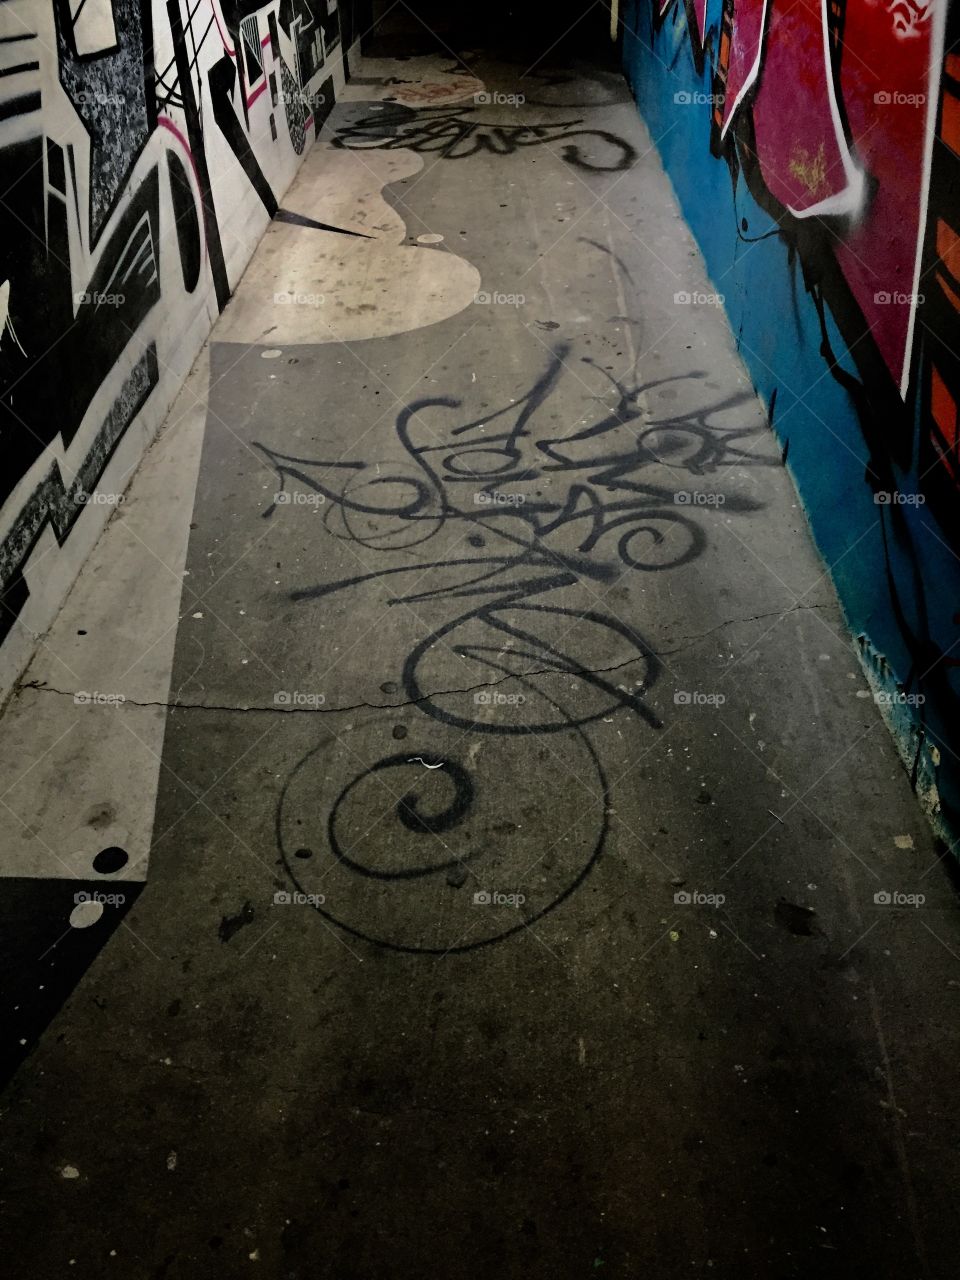 Graffiti on the floor of a hallway with an art mural in both walls